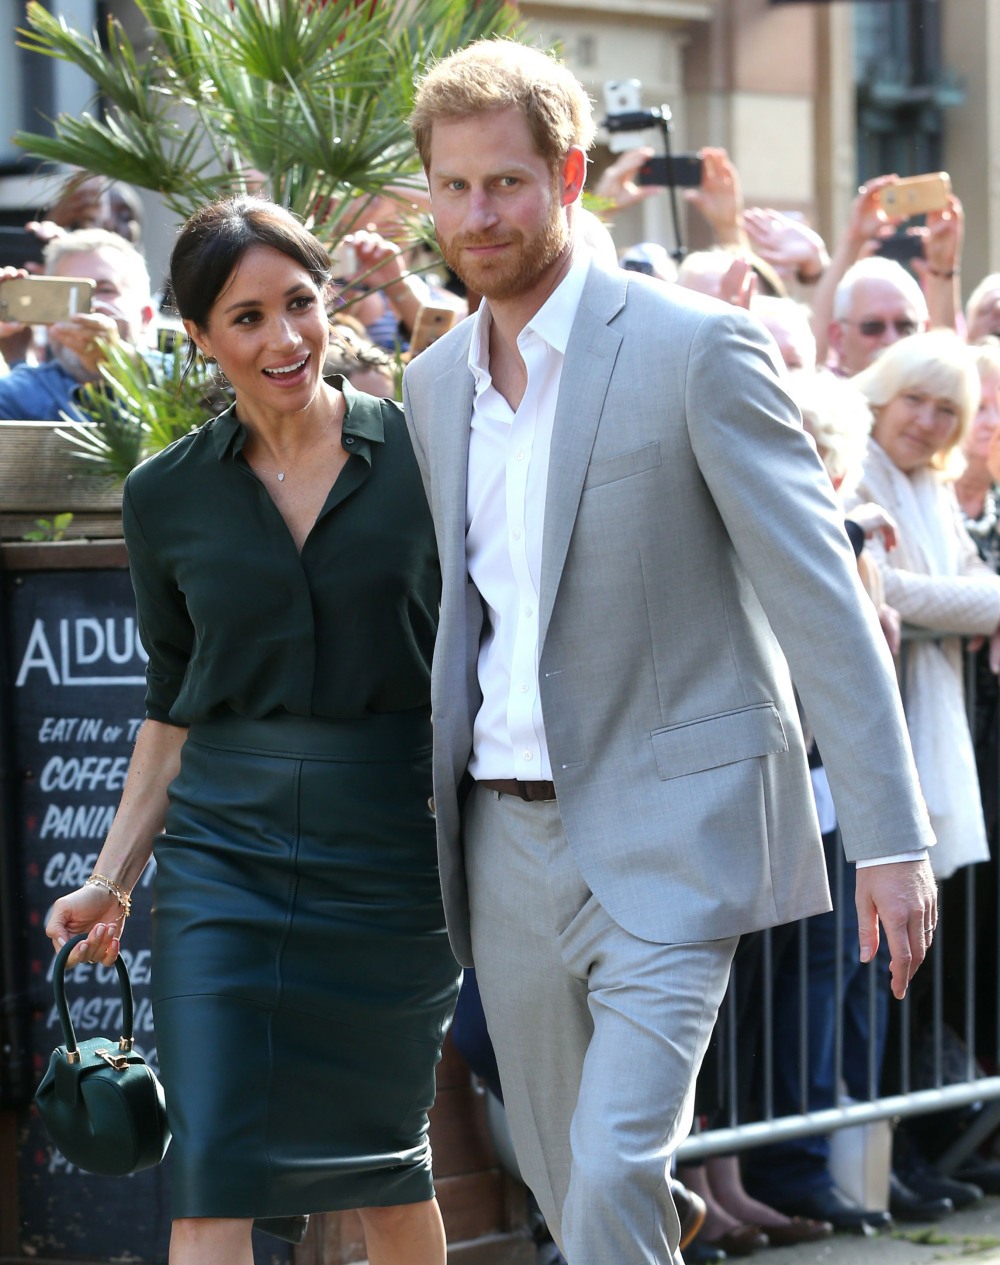 Meghan, Duchess of Sussex and Prince Harry visit Brighton